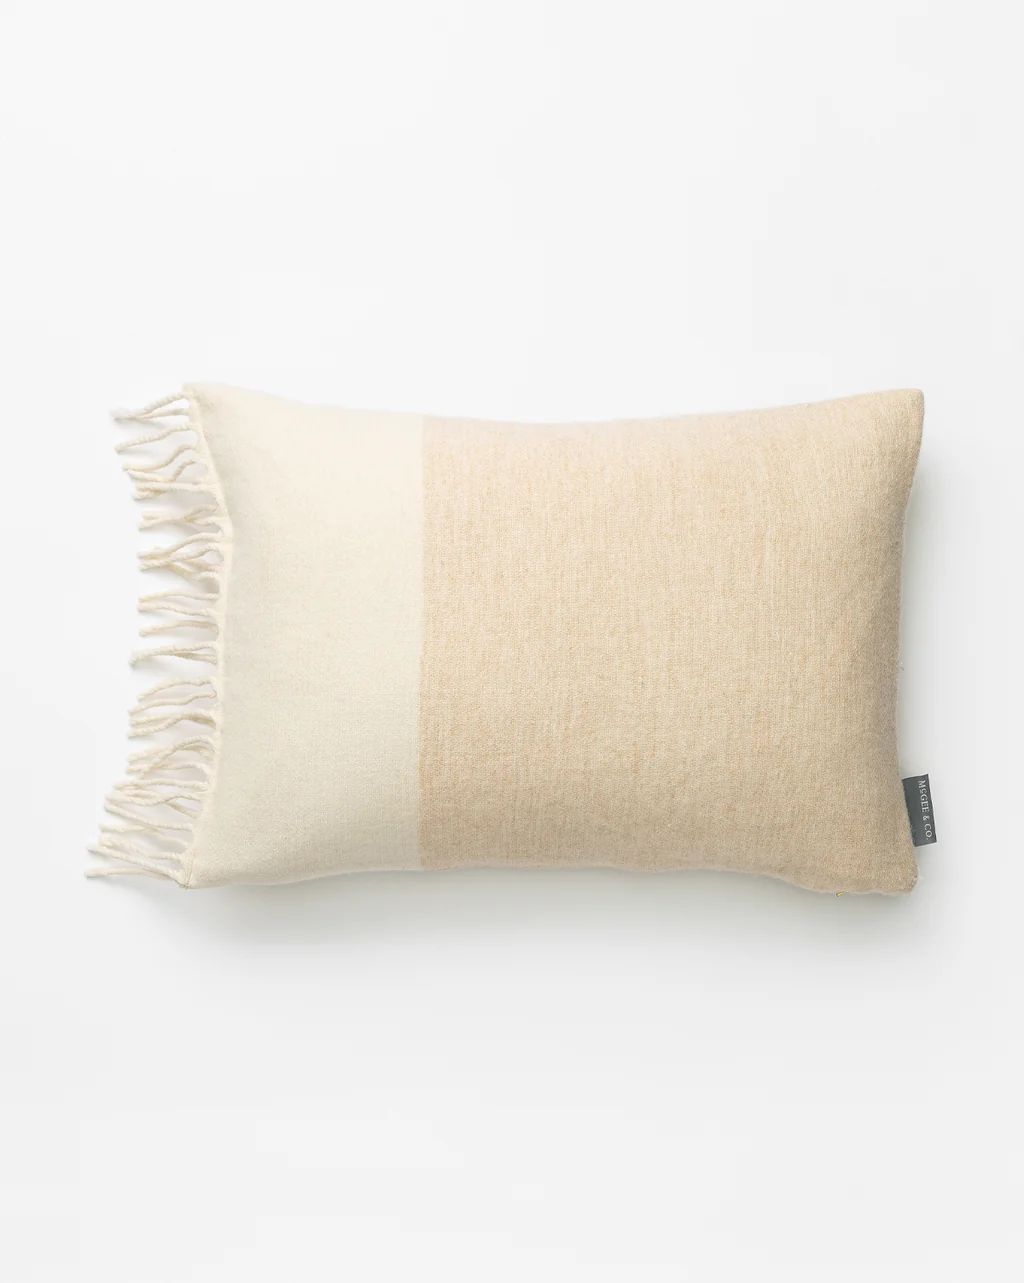 Jada Colorblock Wool Pillow Cover | McGee & Co.